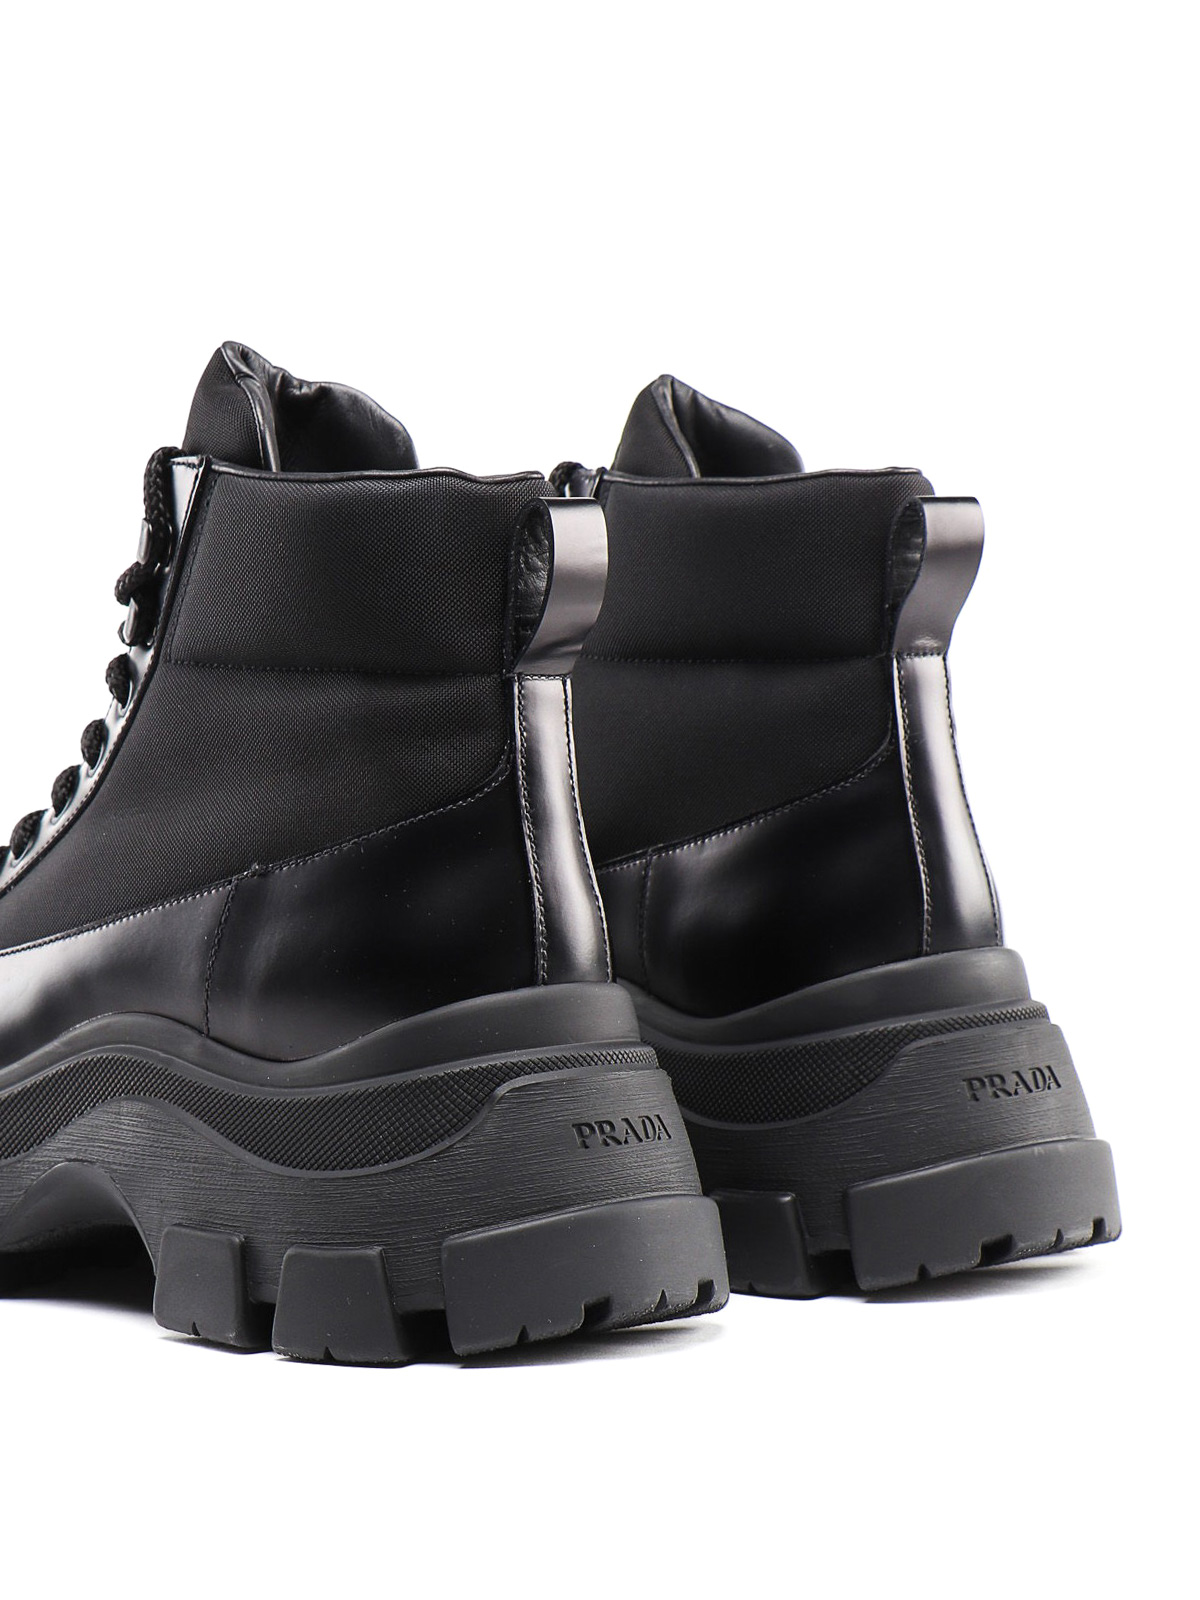 Buy > chunkie boots > in stock